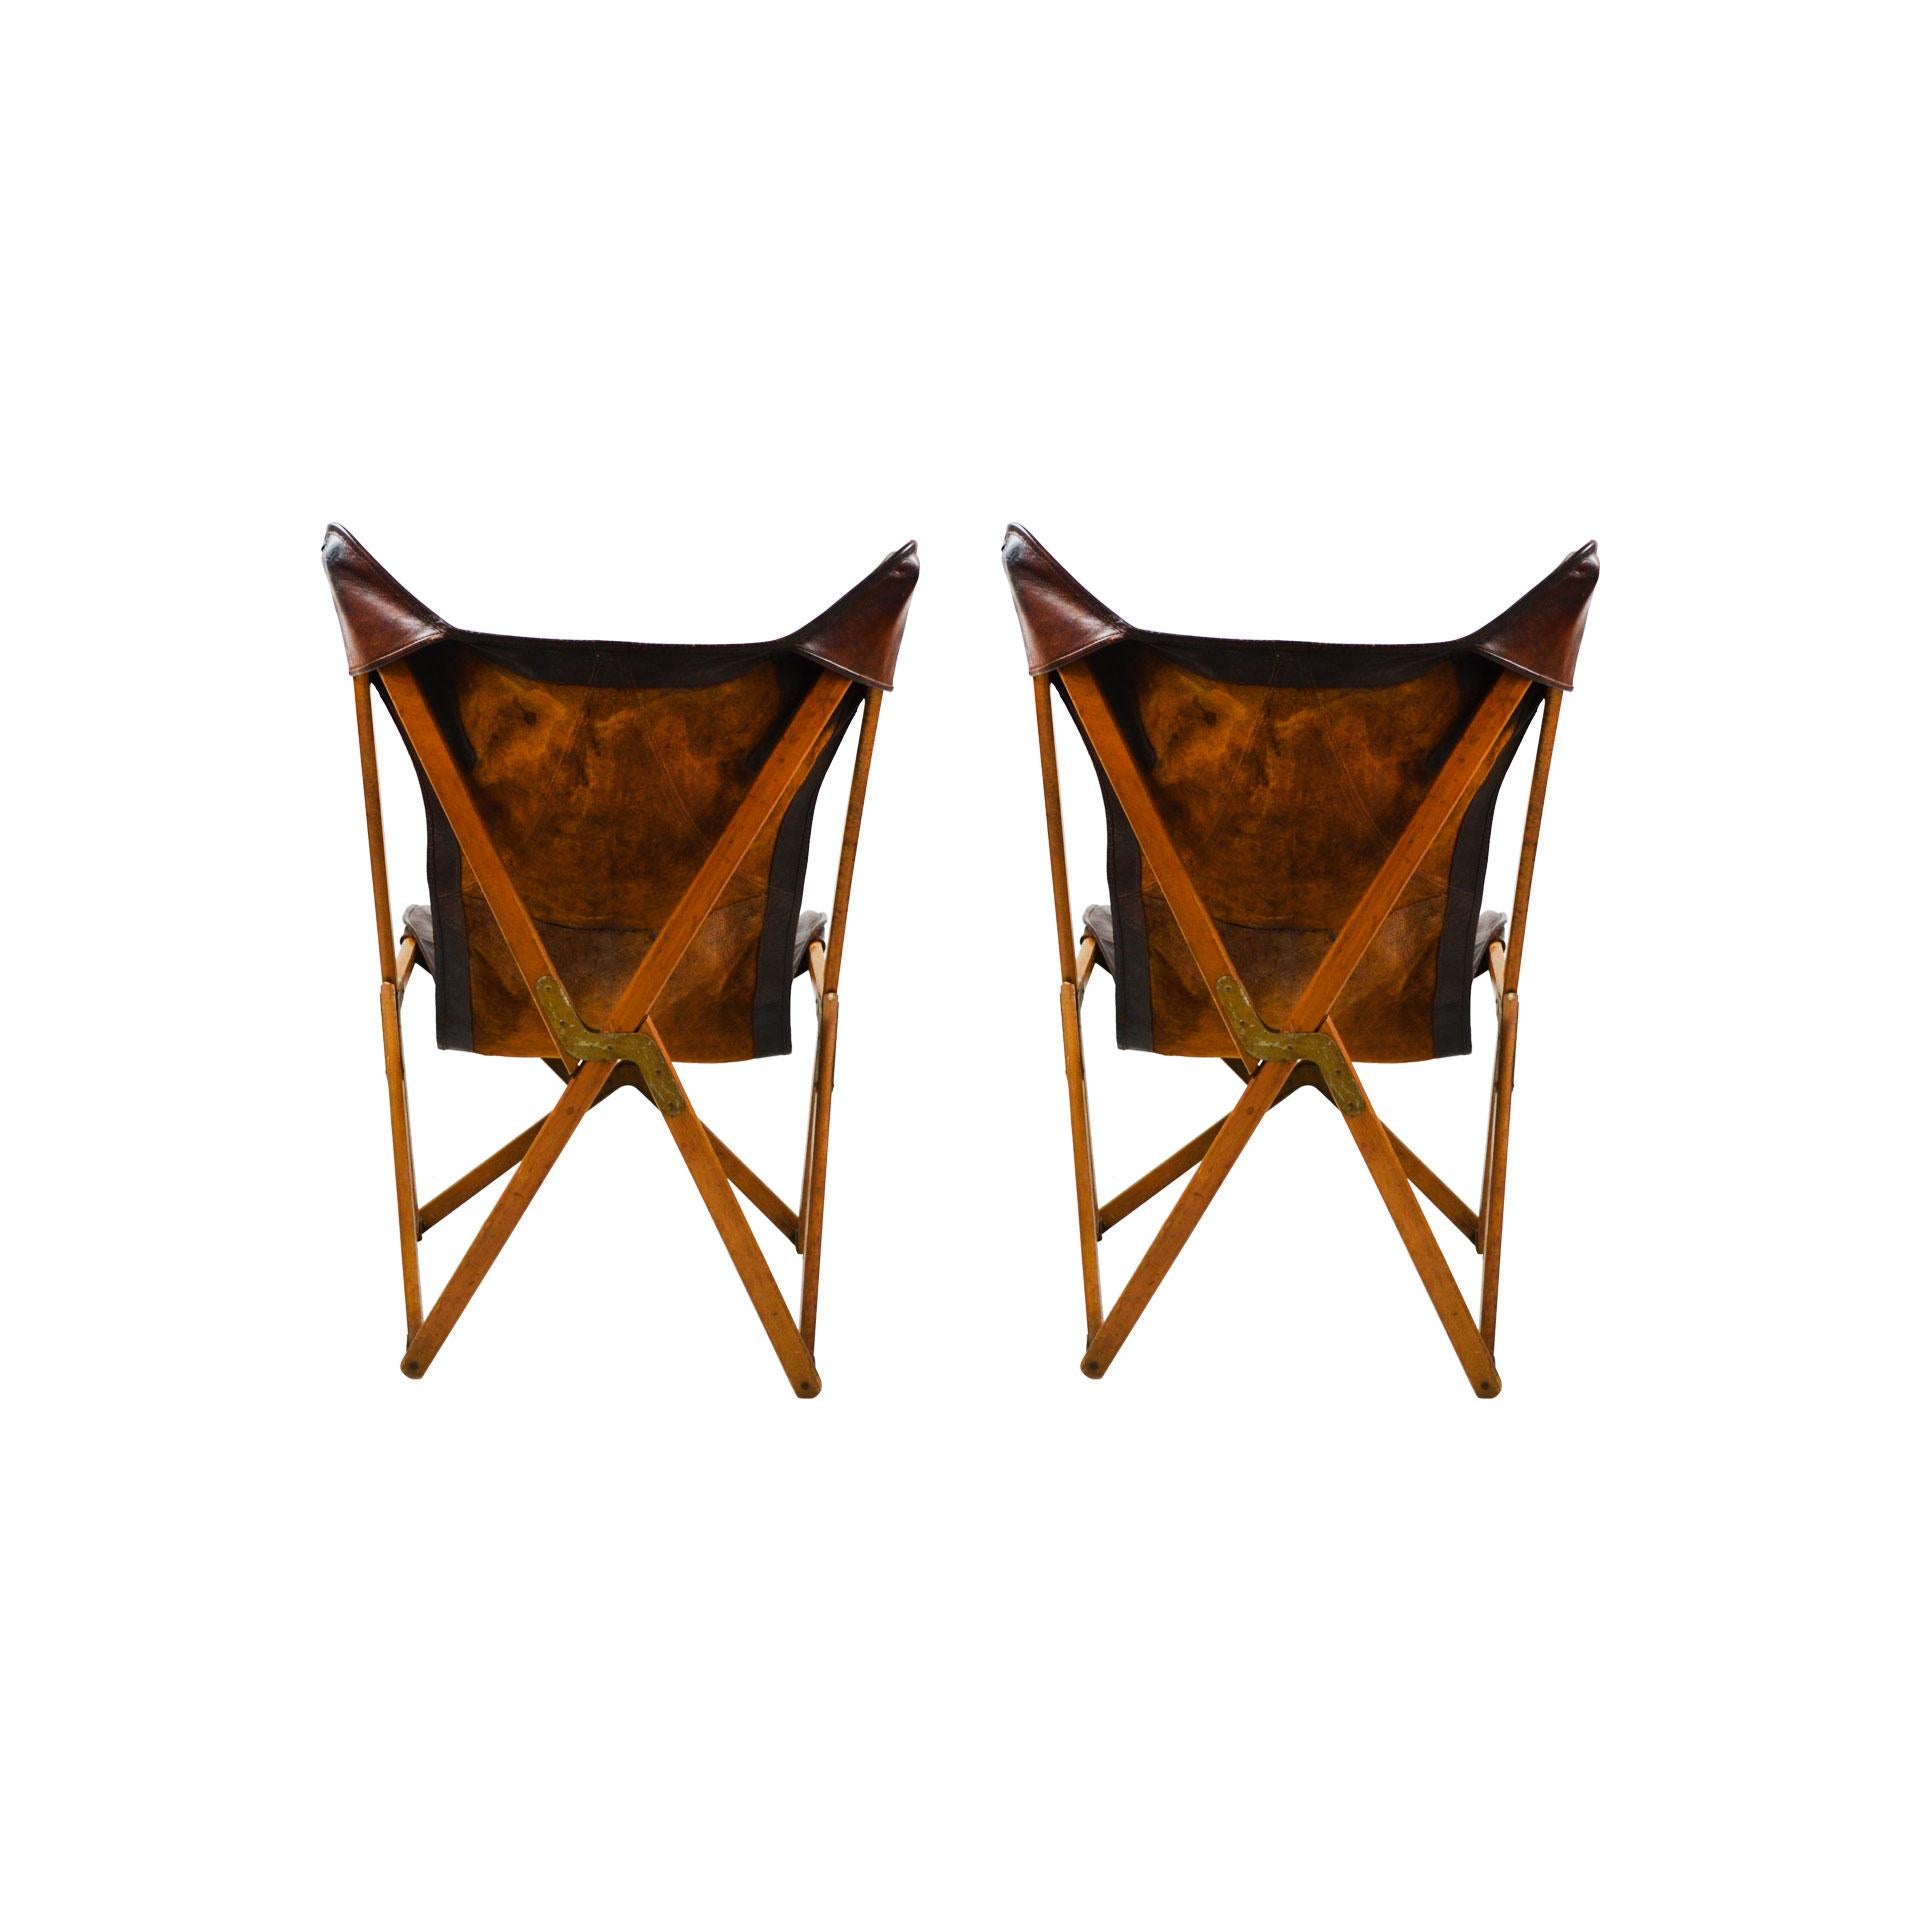 Italian 20th Century Paolo Viganò Tripolina Folding Armchairs in Leather and Wood, Pair